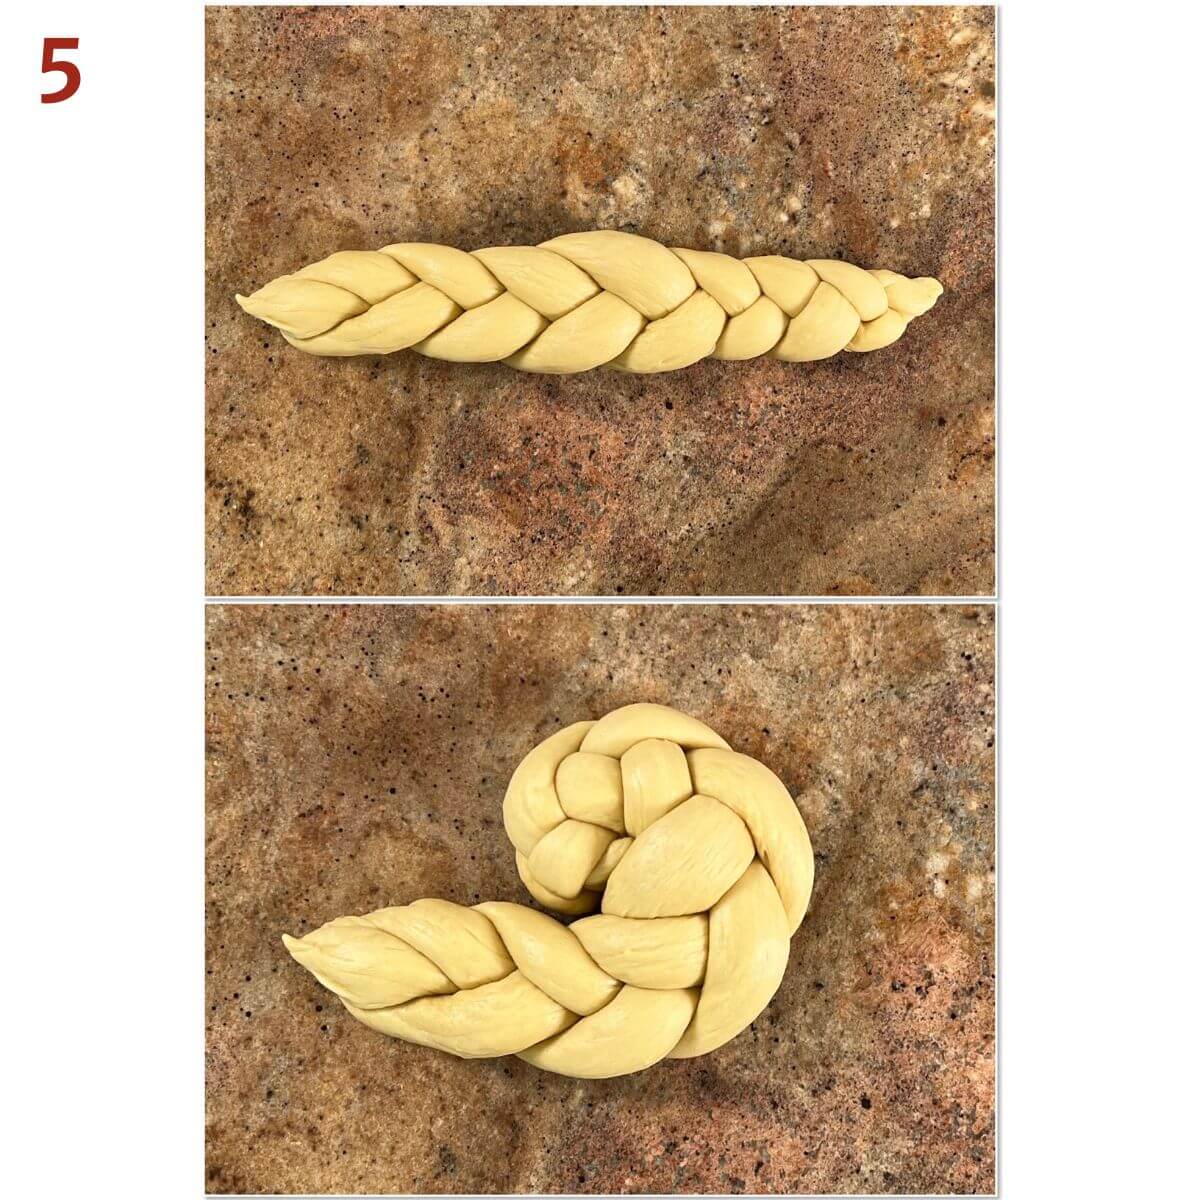 Collage of rolling up a three-strand braid into a spiral round challah.